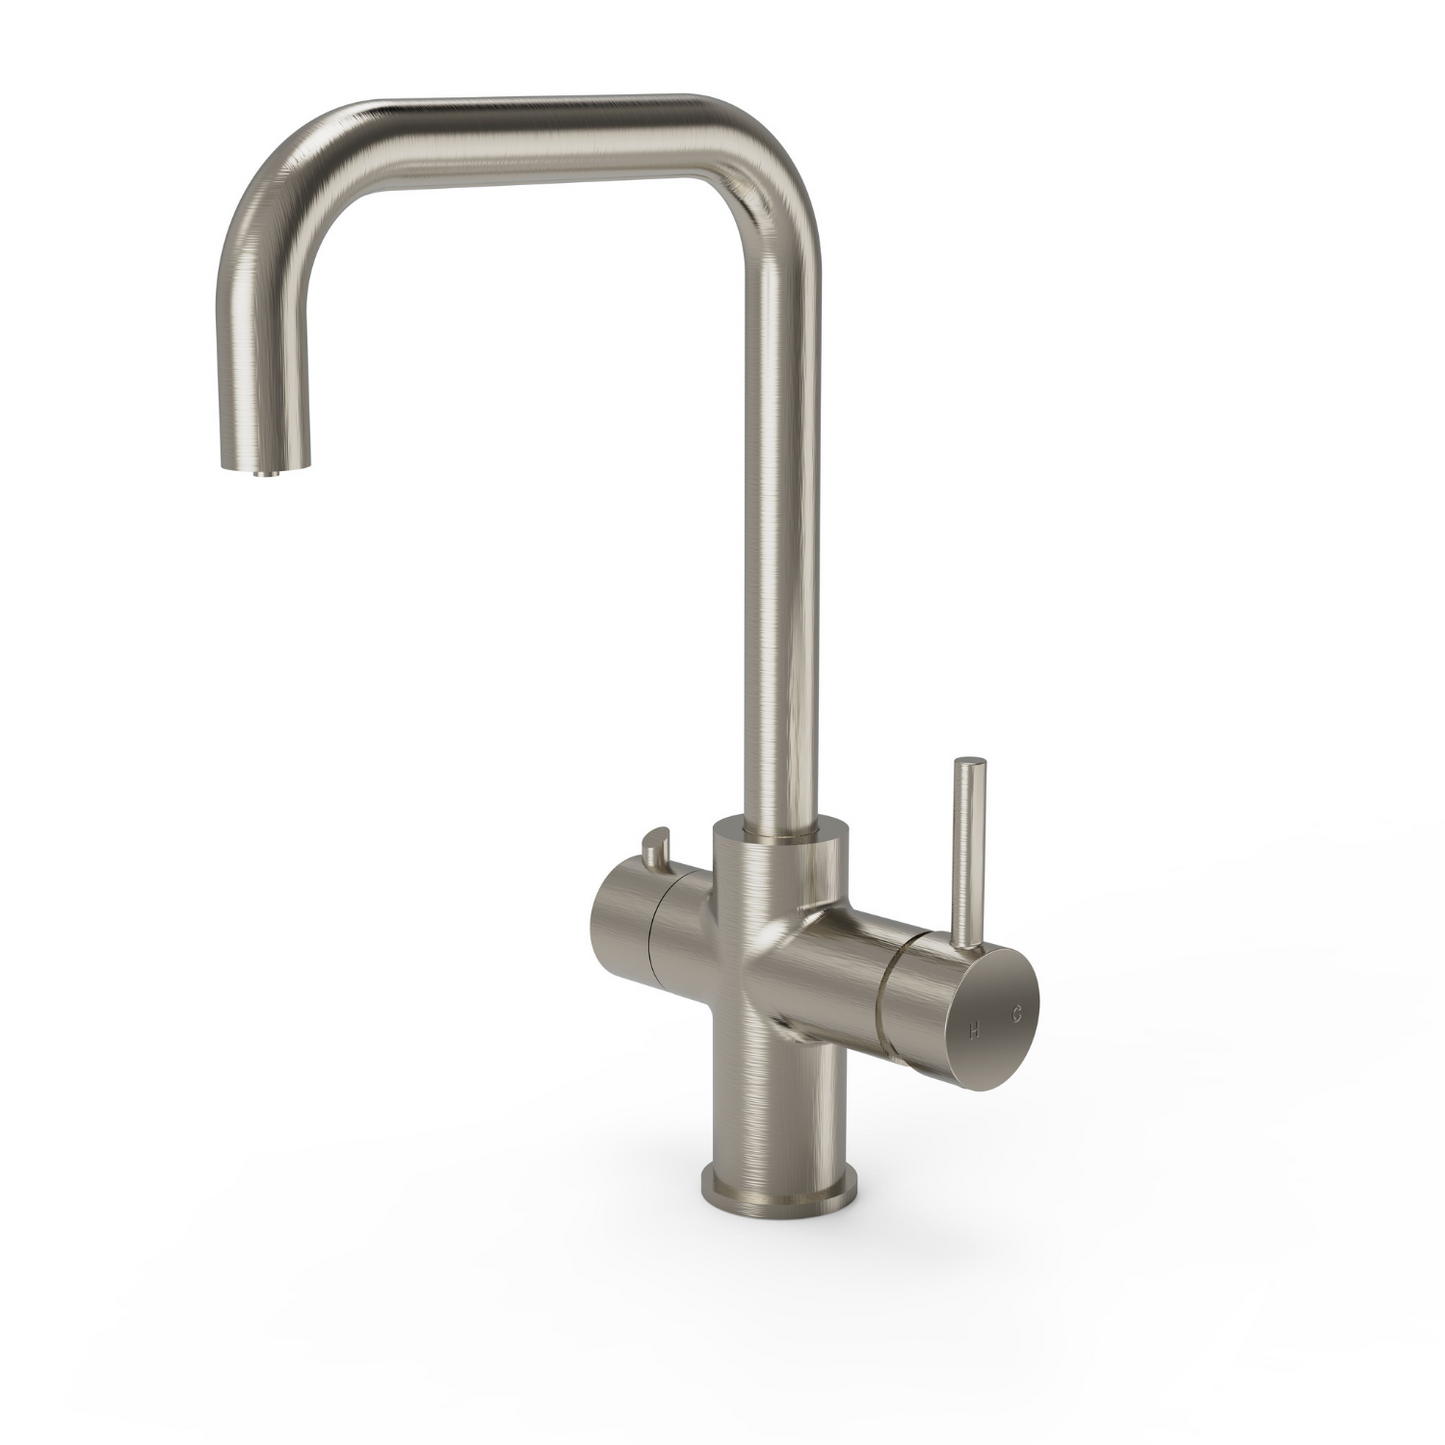 Paila 3 in 1 Boiling Water Tap with Boiler and Filter - Brushed Nickel